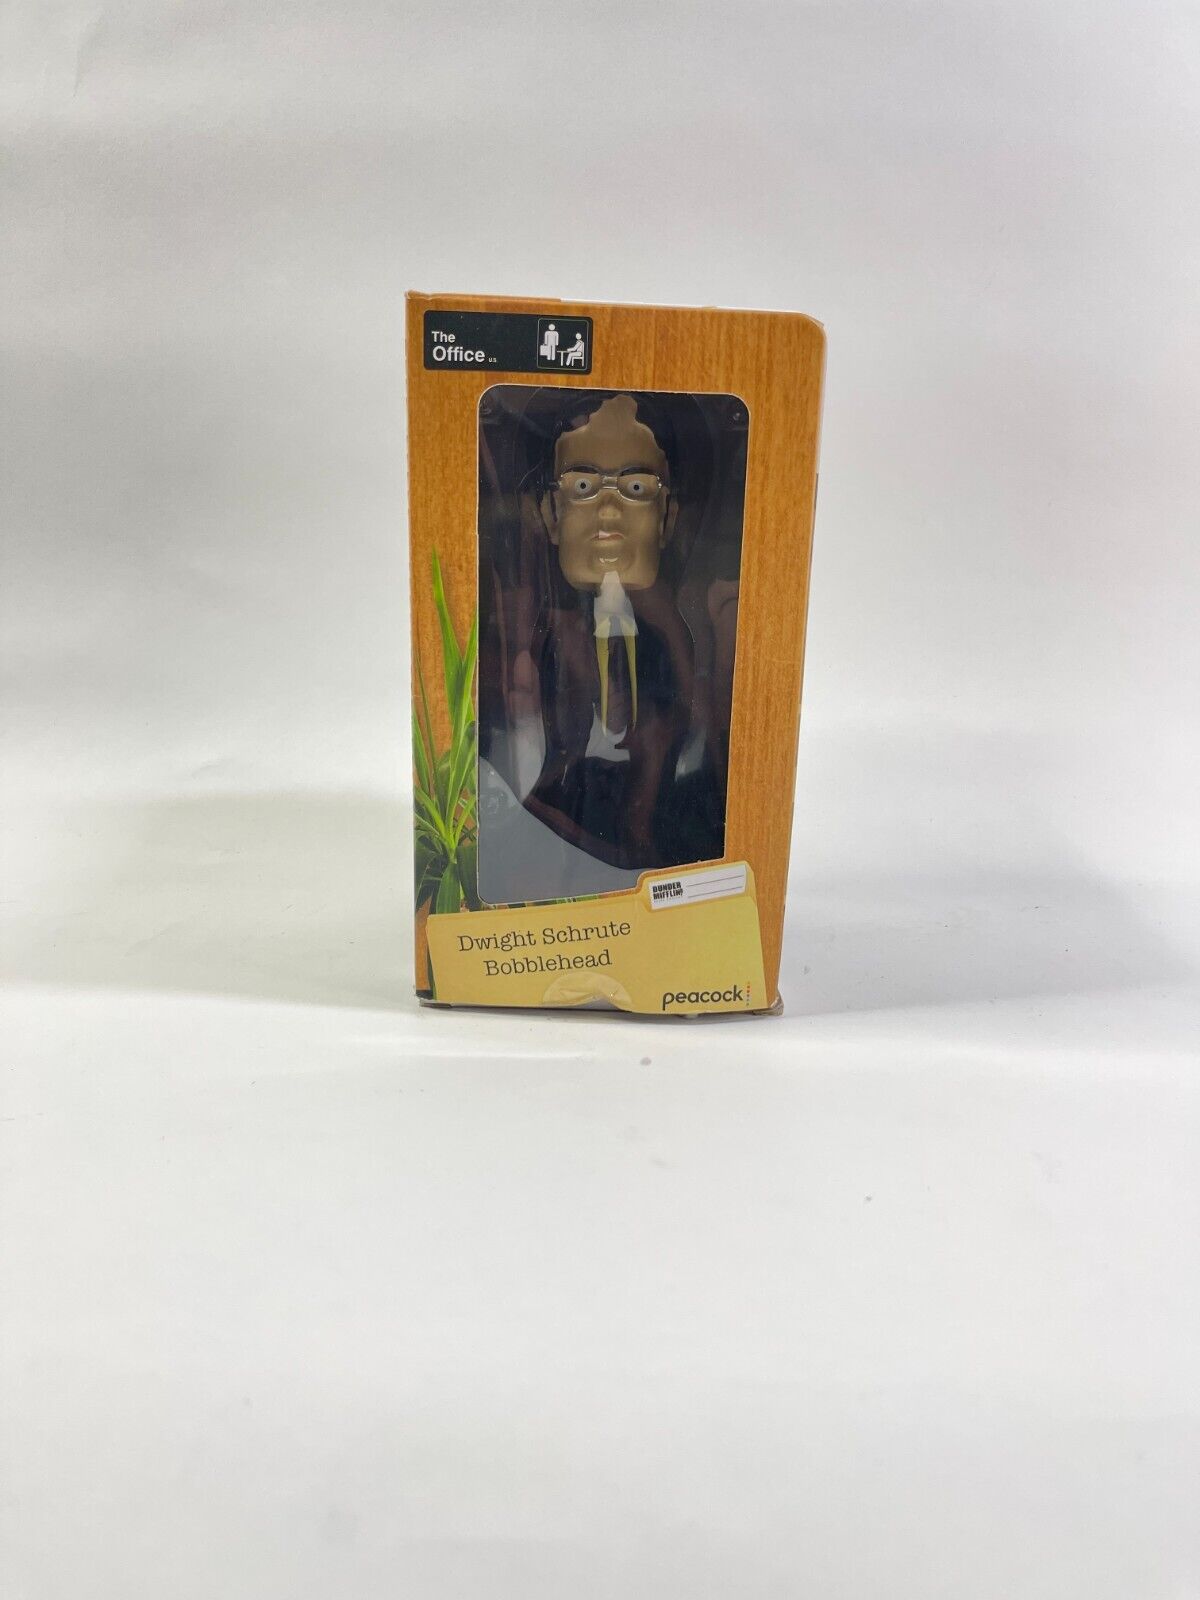 The Office Dwight Schrute Bobblehead Figure Collectible Peacock New In Box